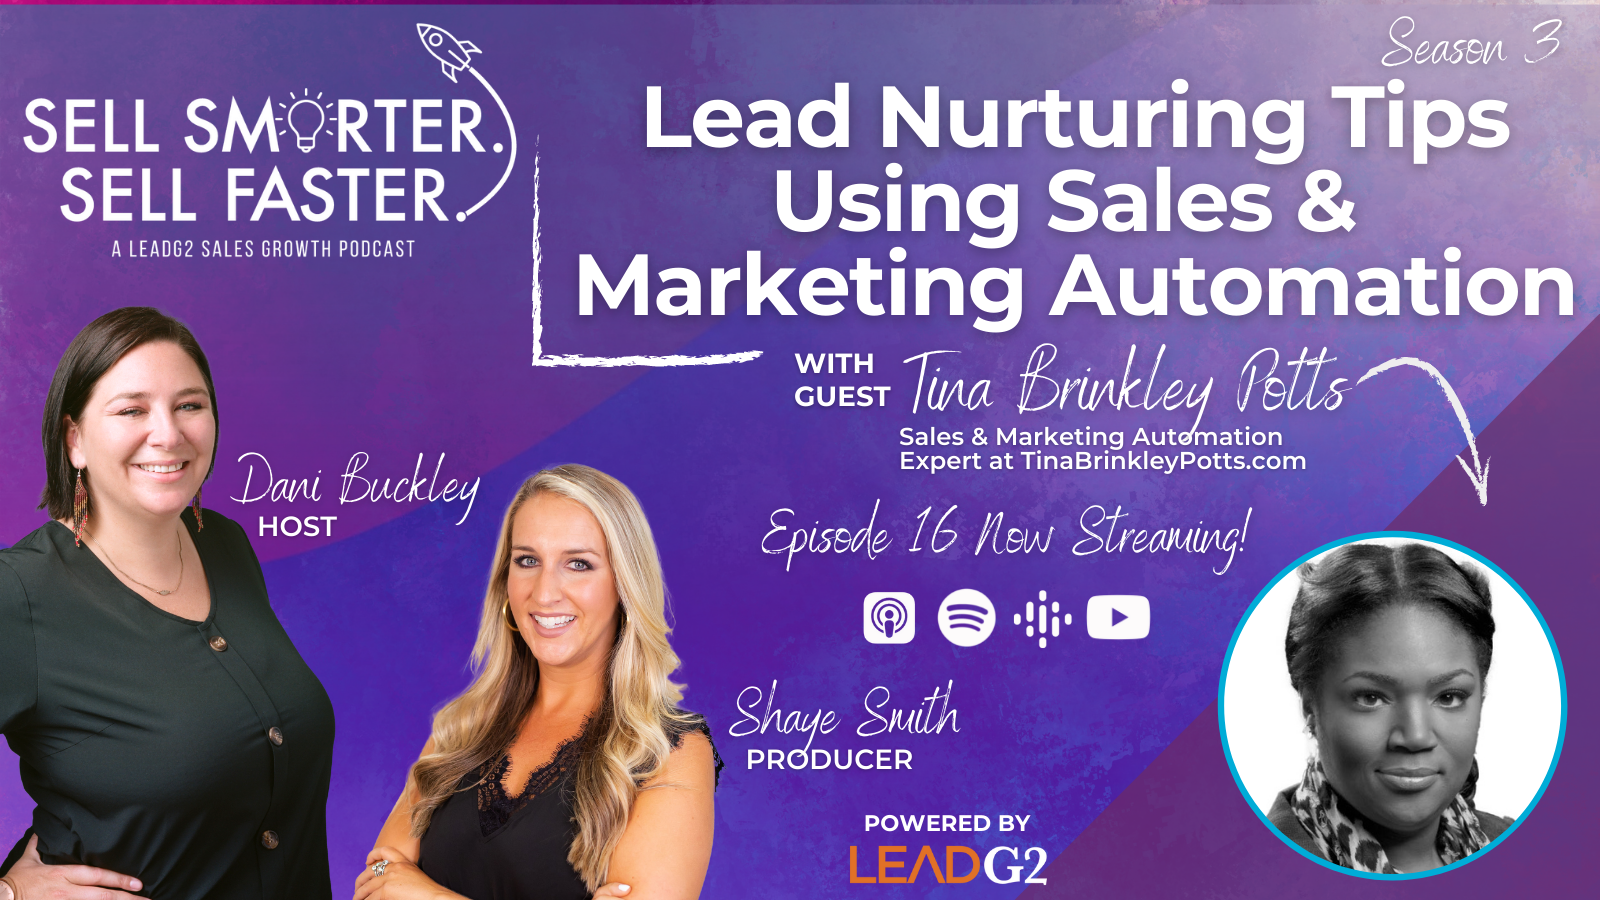 Lead Nurturing Tips Using Sales & Marketing Automation with Tina Brinkley Potts